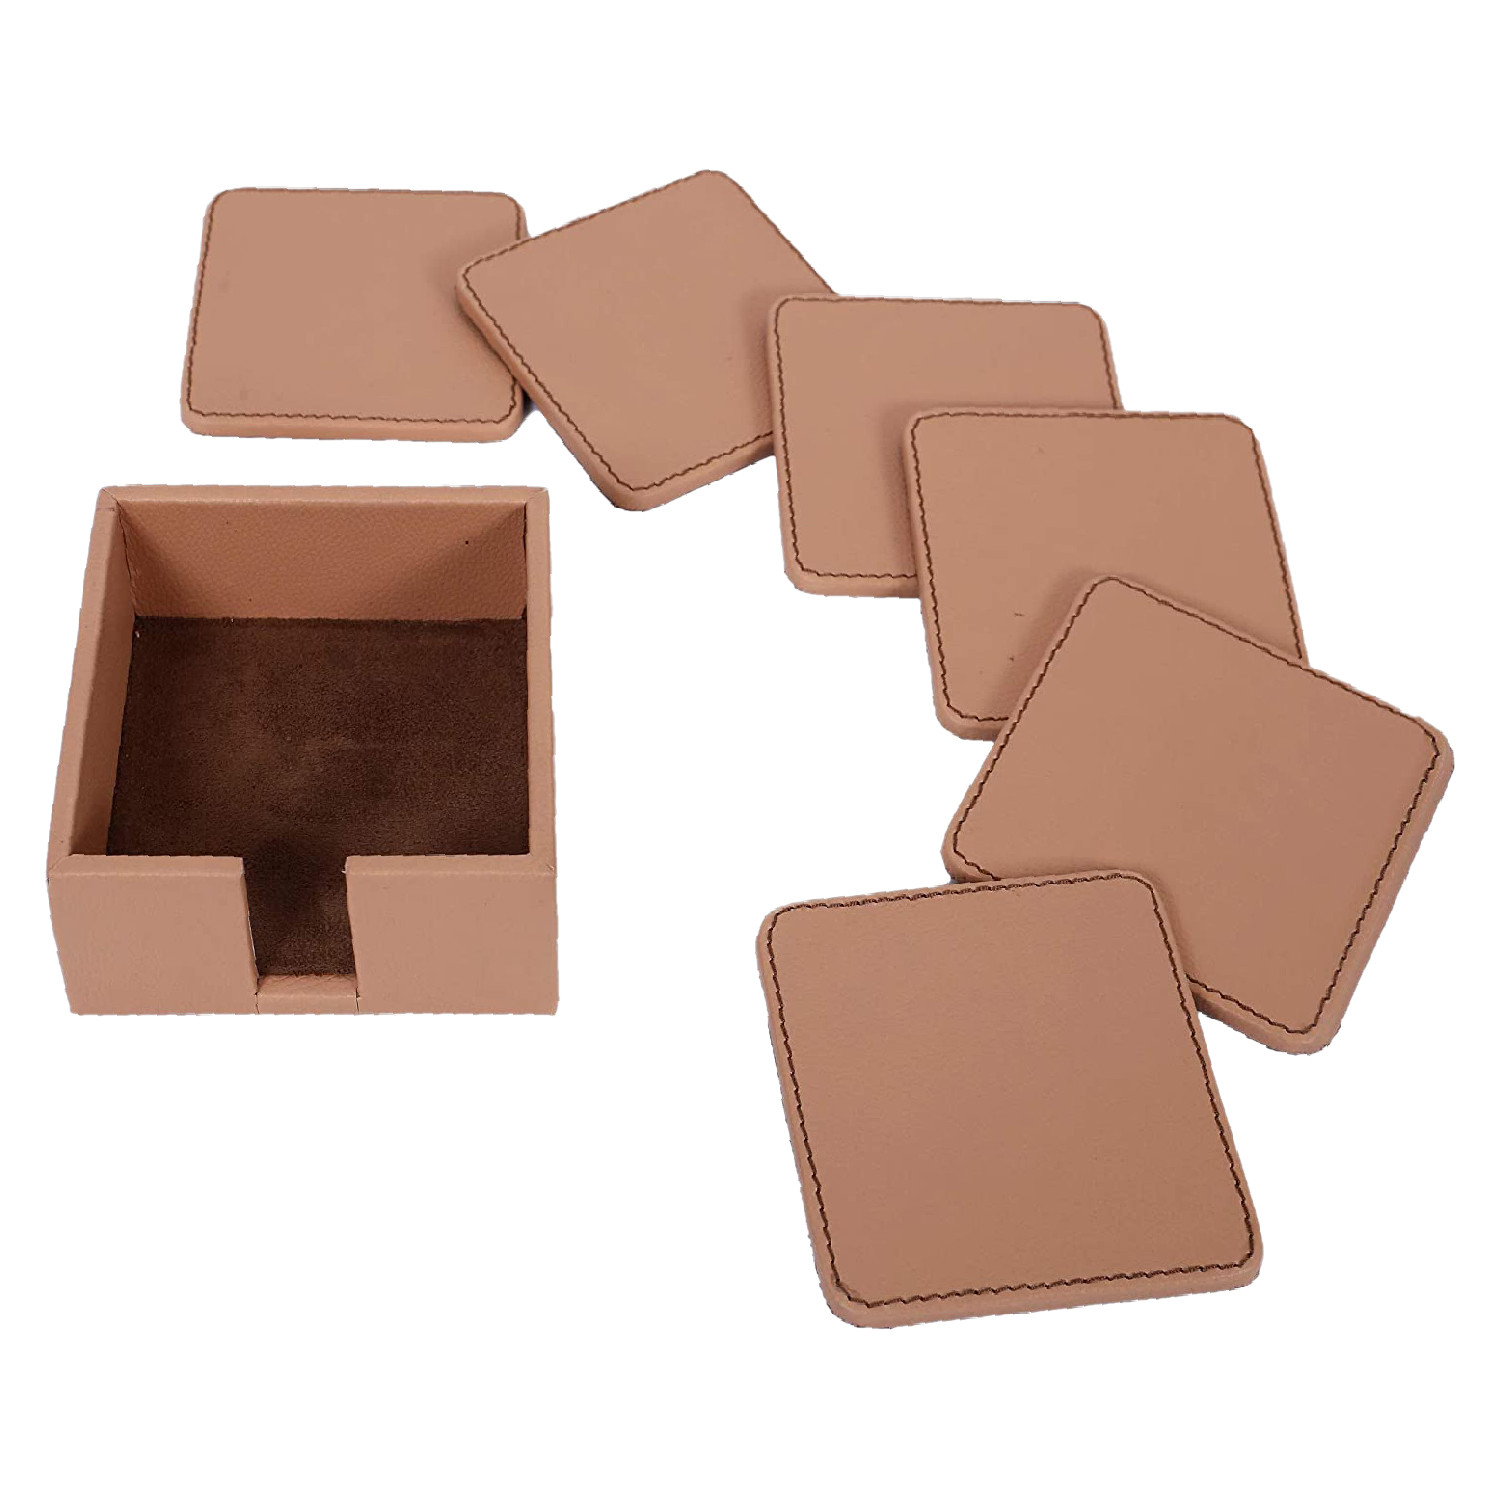 Kuber Industries Tea Coaster|Soft Leather Heat Insulation Tabletop Coasters|Decorative Holder for Tea, Coffee & Office Desk With Stand Set of 6 (Light Brown)